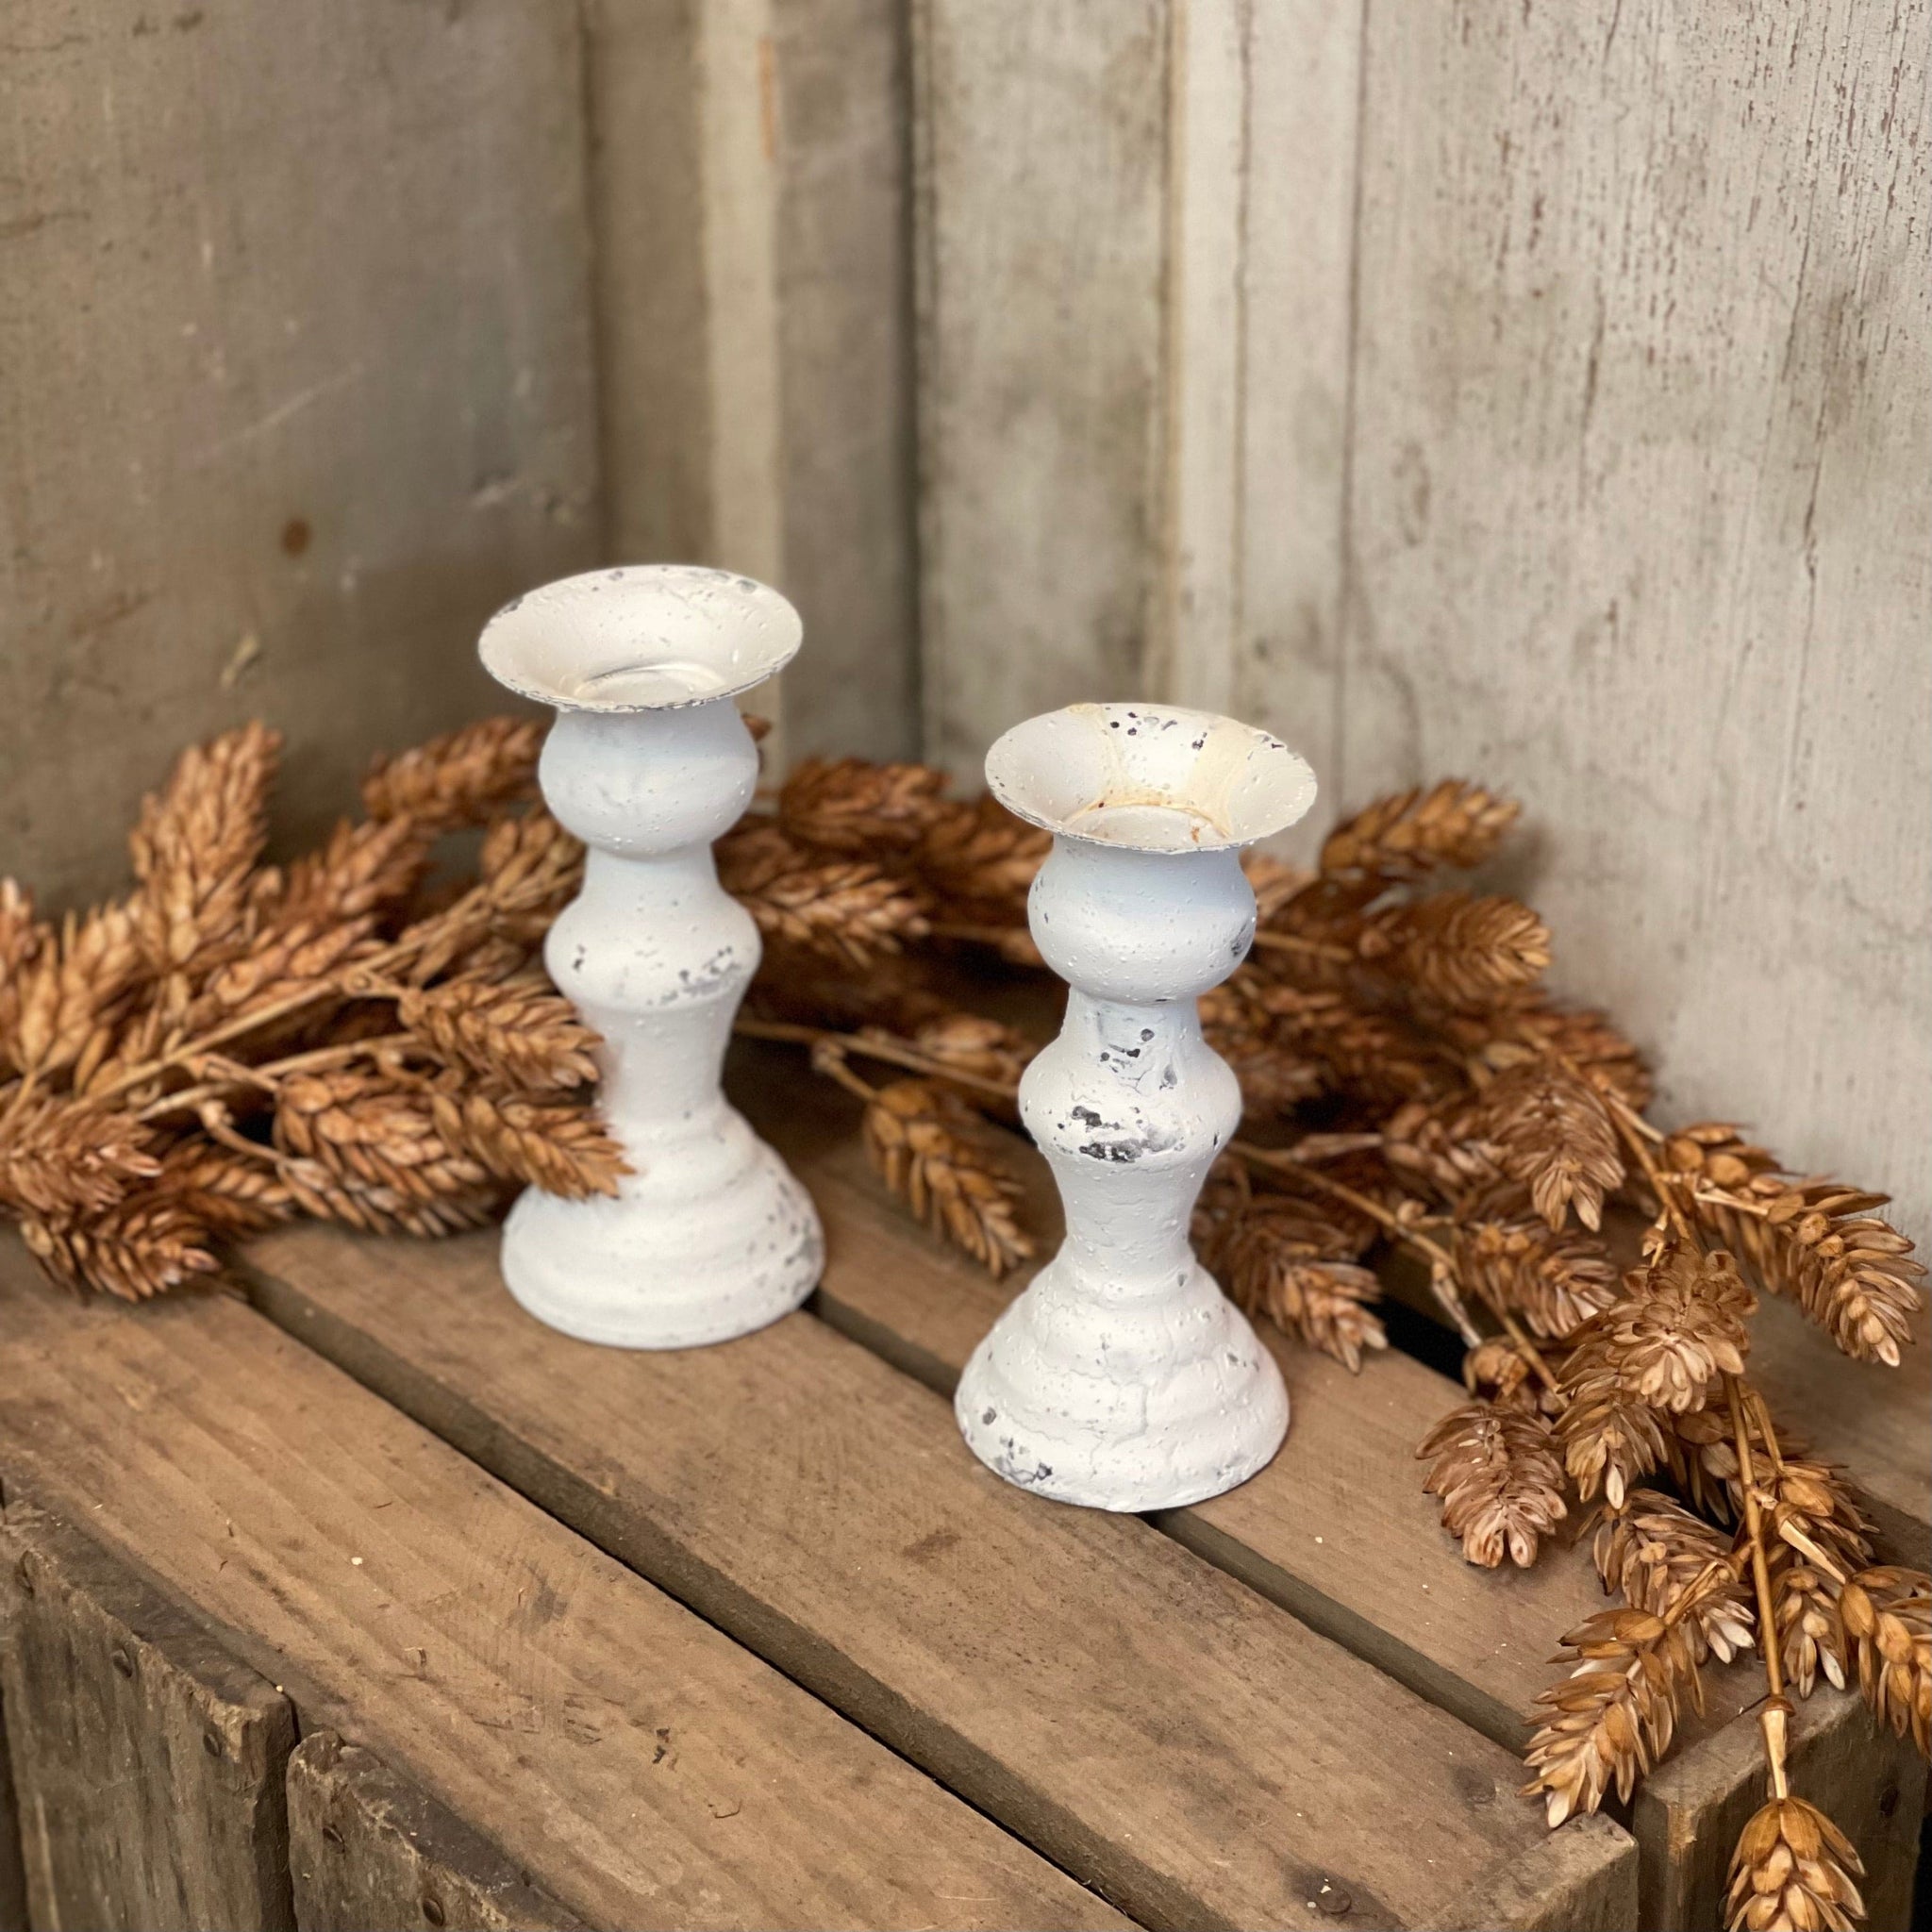 5.5" Rustic White Candle Holders | Set of 2 Country, Country Decor, Country Home, Country Kitchen Decor, Everyday, Farmhouse Decor, Farmhouse Decorating, Home Accents, New, Primitive, Primitive Decor, Primitive Decorating, Spring 5.5" Rustic White Candle Holders | Set of 2 Country, Country Decor, Country Home, Country Kitchen Decor, Everyday, Farmhouse Decor, Farmhouse Decorating, Home Accents, New, Primitive, Primitive Decor, Primitive Decorating, Spring 